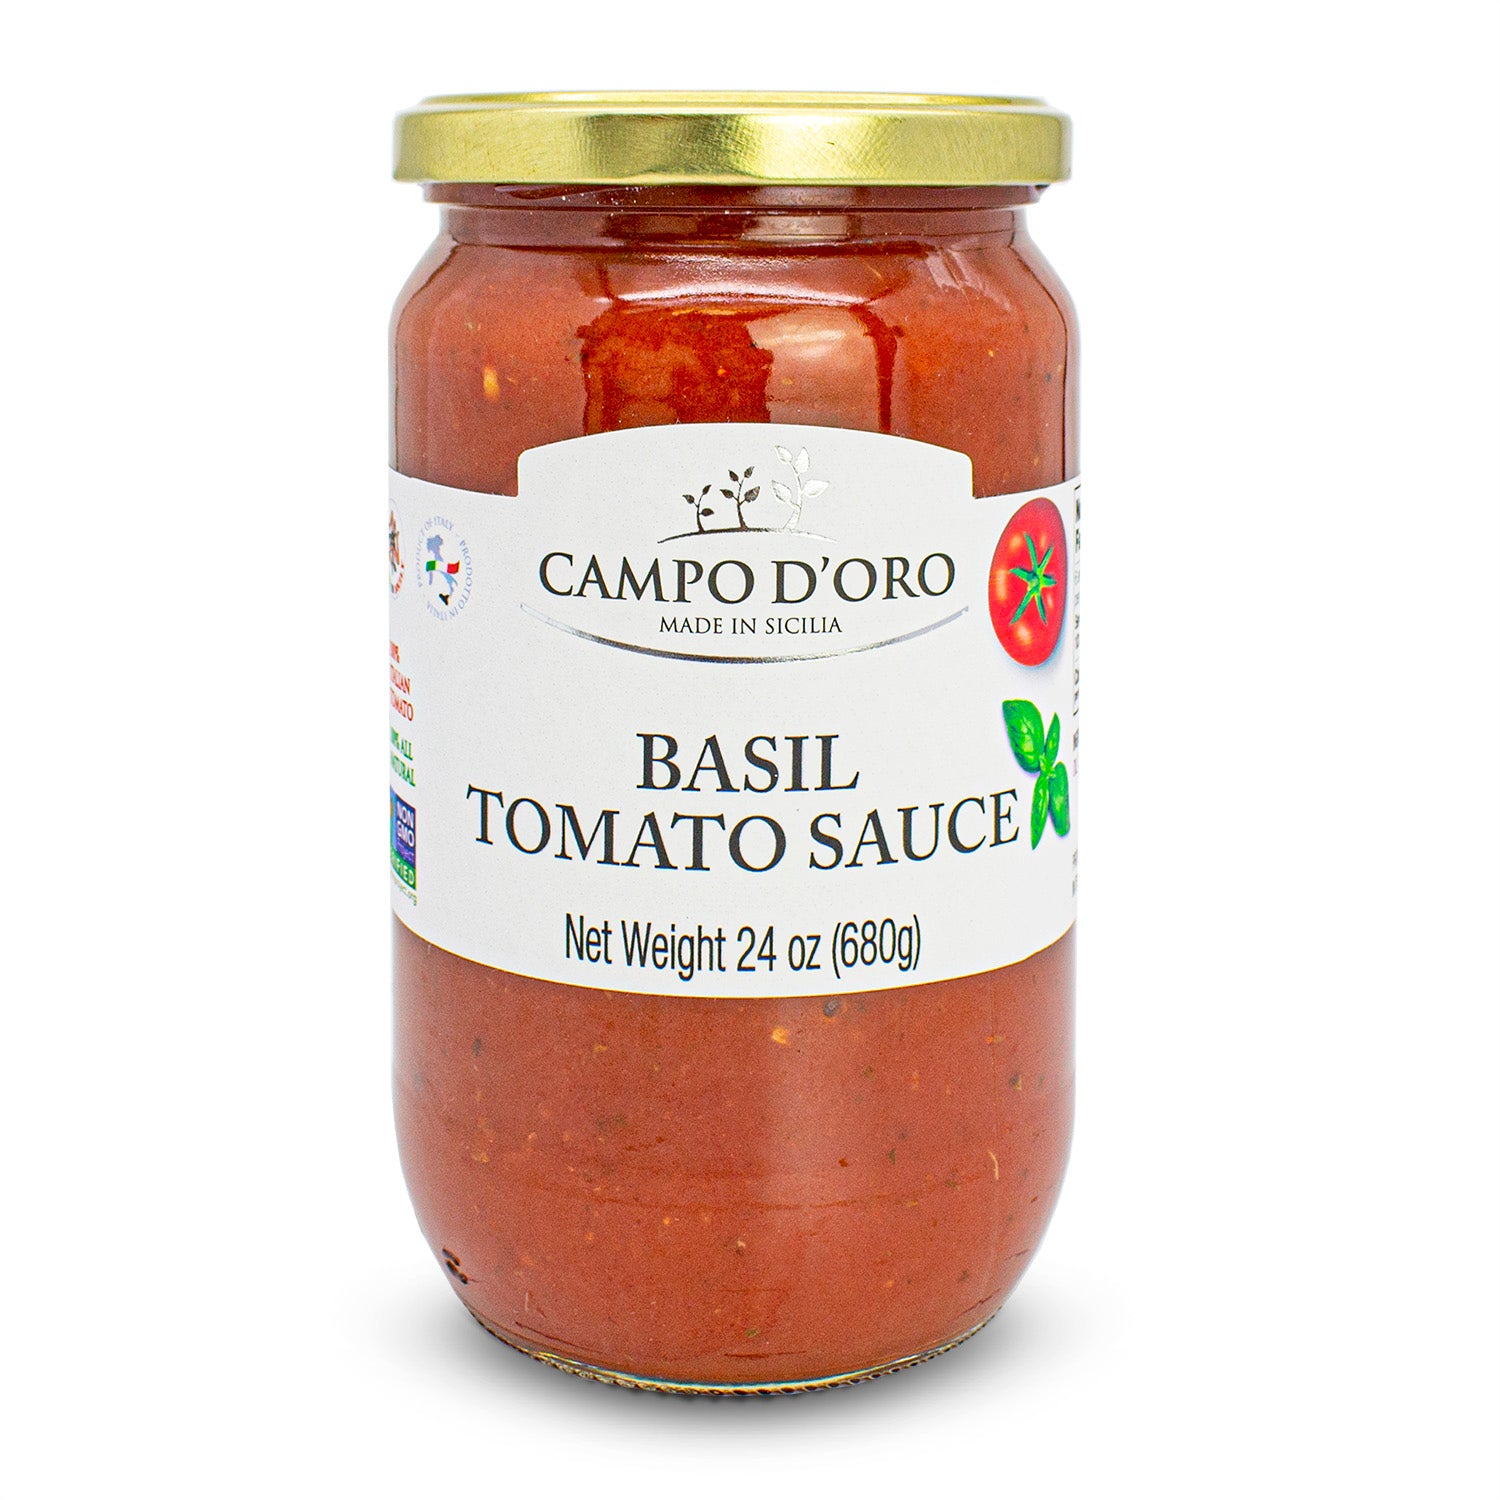 Campo D’Oro, Tomato Sauce with Basil, Glass Jar 24oz. Ingredients: Italian Tomatoes (chopped, sieved and paste), italian extra virgin olive oil, onions, carrots, basil, Sicilian salt